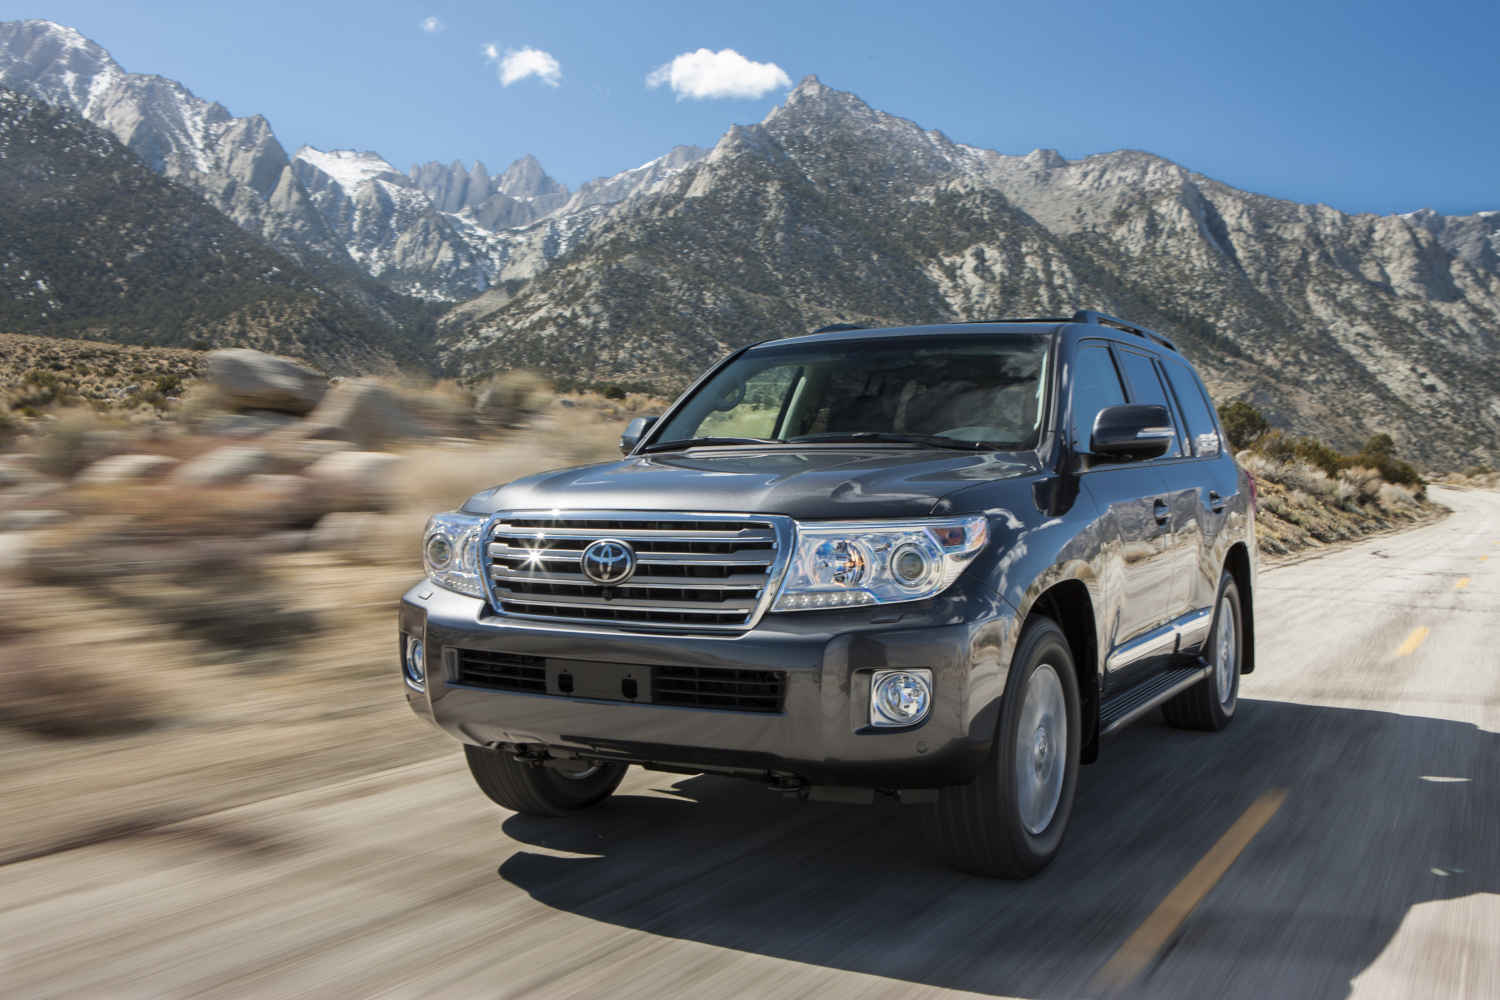 The most reliable Toyota SUV is the Land Cruiser